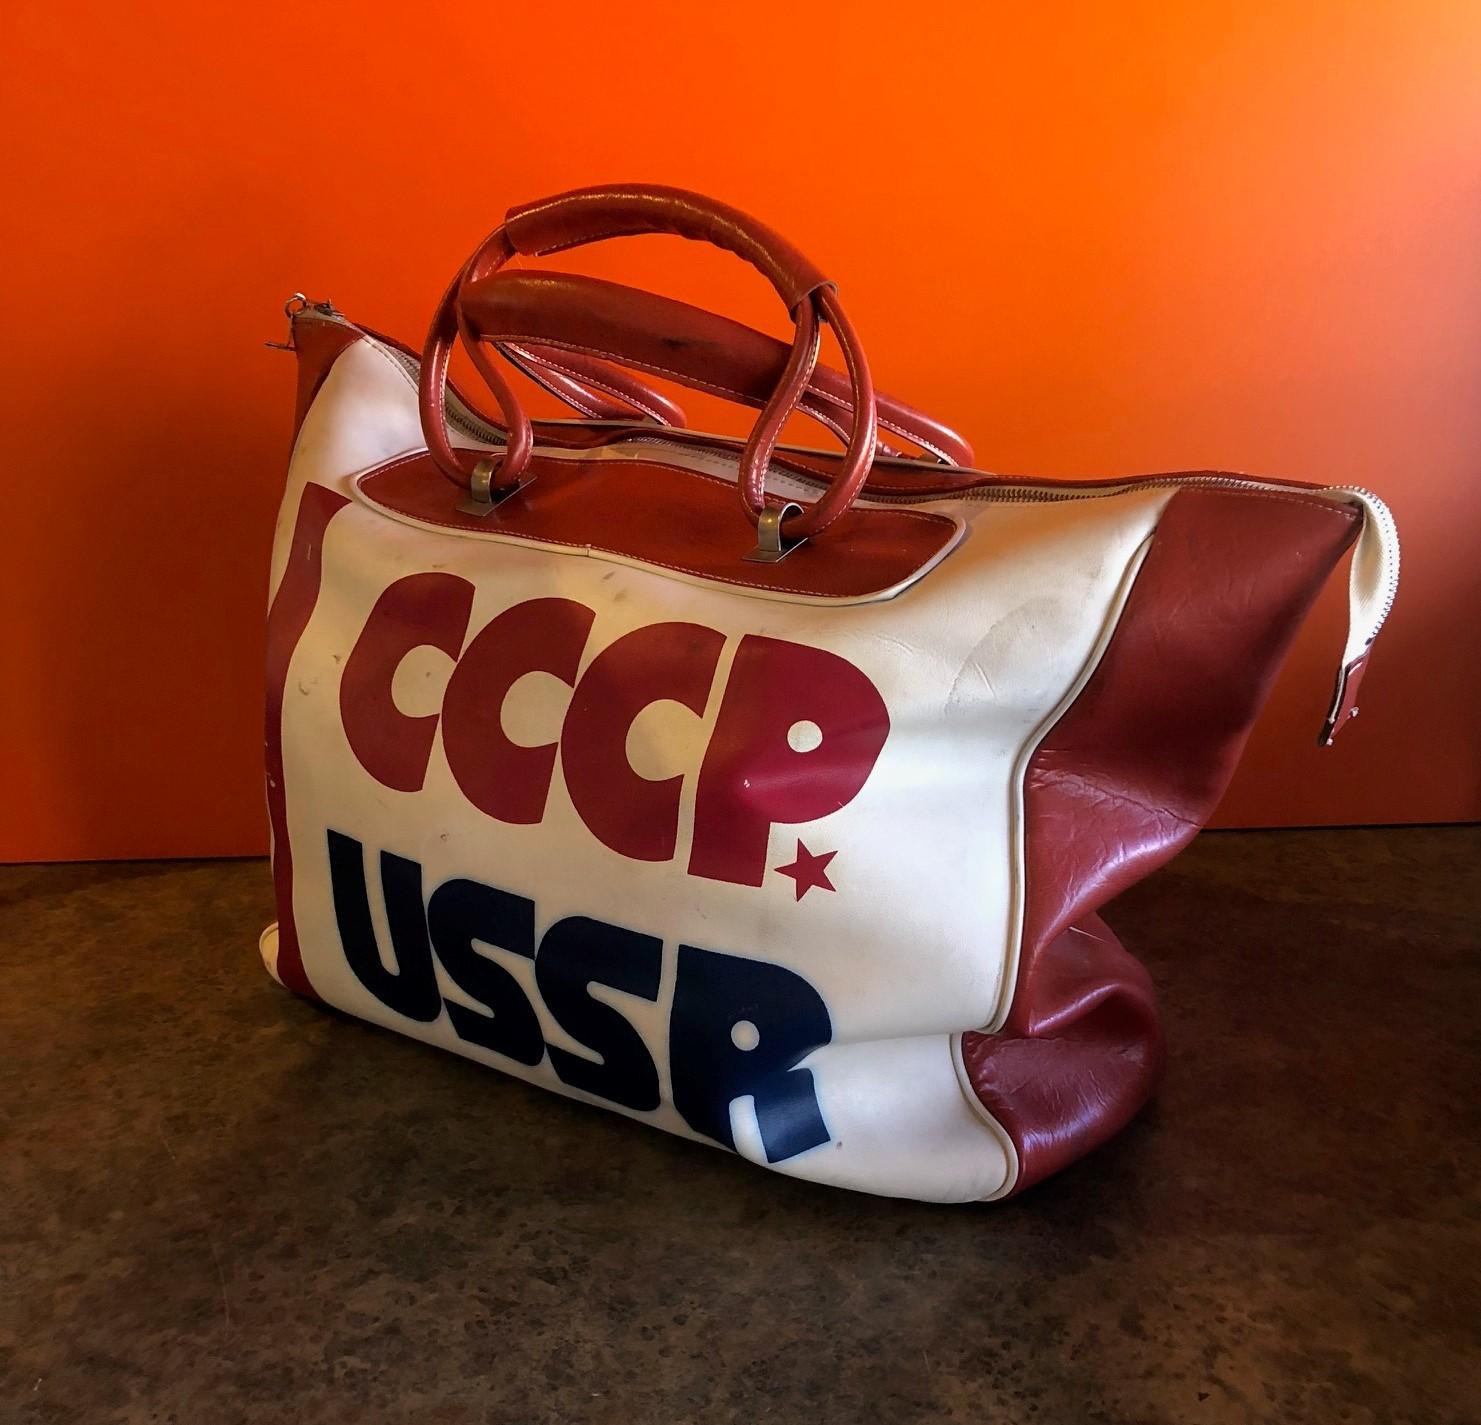 Russian Authentic CCCP USSR Olympic Sports Bag